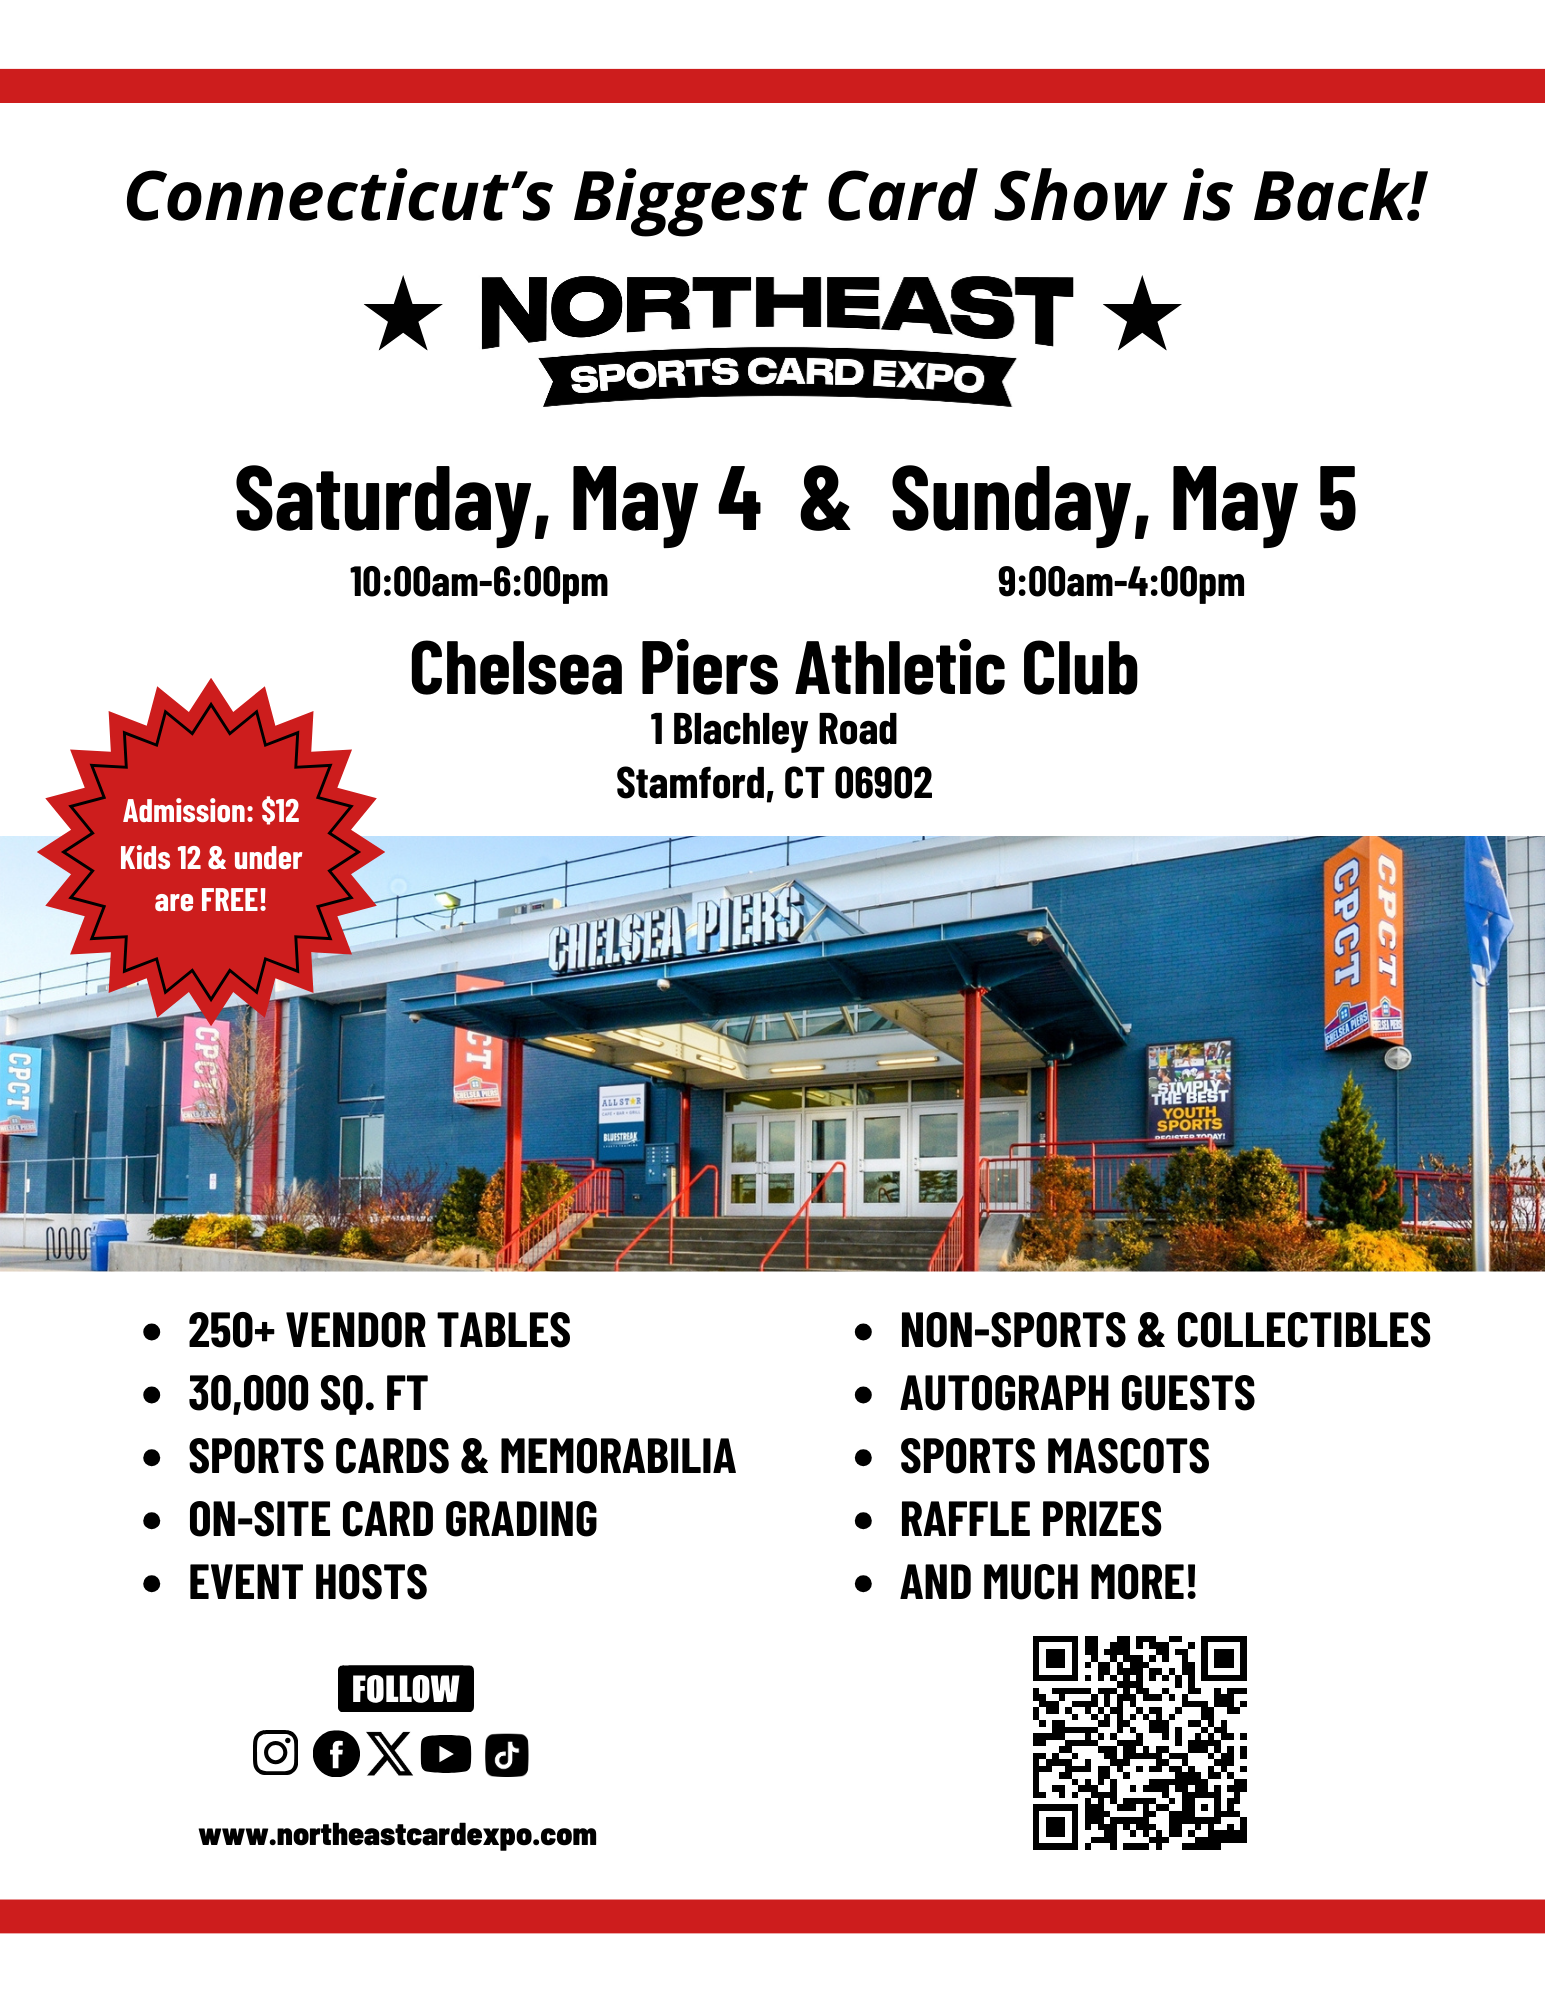 Northeast Sports Card Expo Stamford